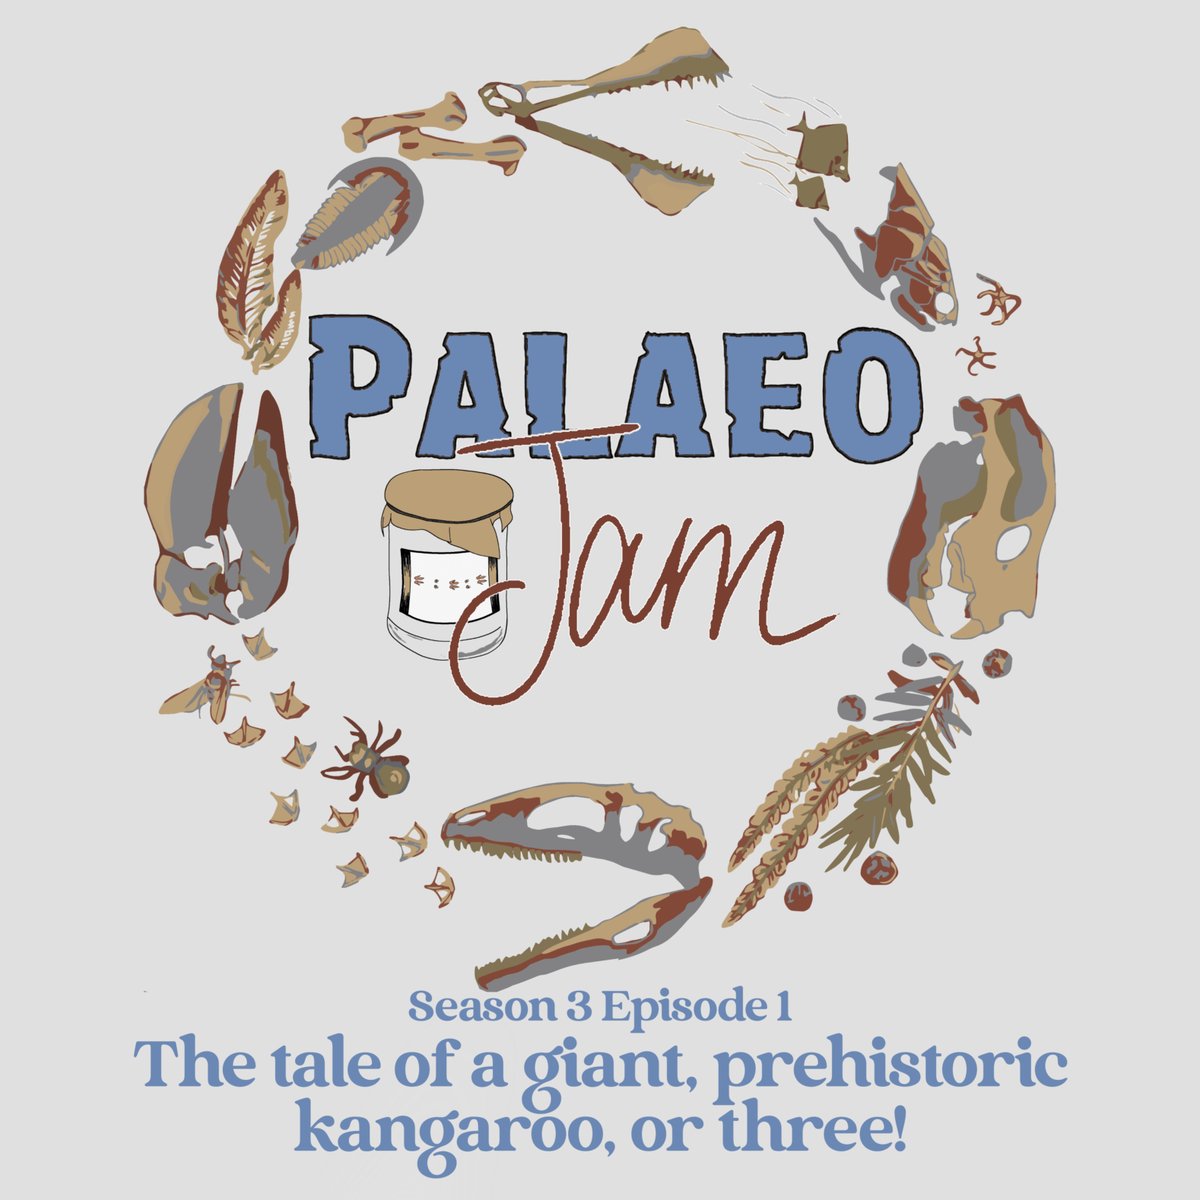 The first episode of Season 3 the Palaeo Jam podcast is out, and features a fascinating conversation with @Heapsgood and @IsaacARKerr of @FlindersPalaeo about recently published research on the giant kangaroos know as Protemnodon. palaeojam.podbean.com/e/the-tale-of-…